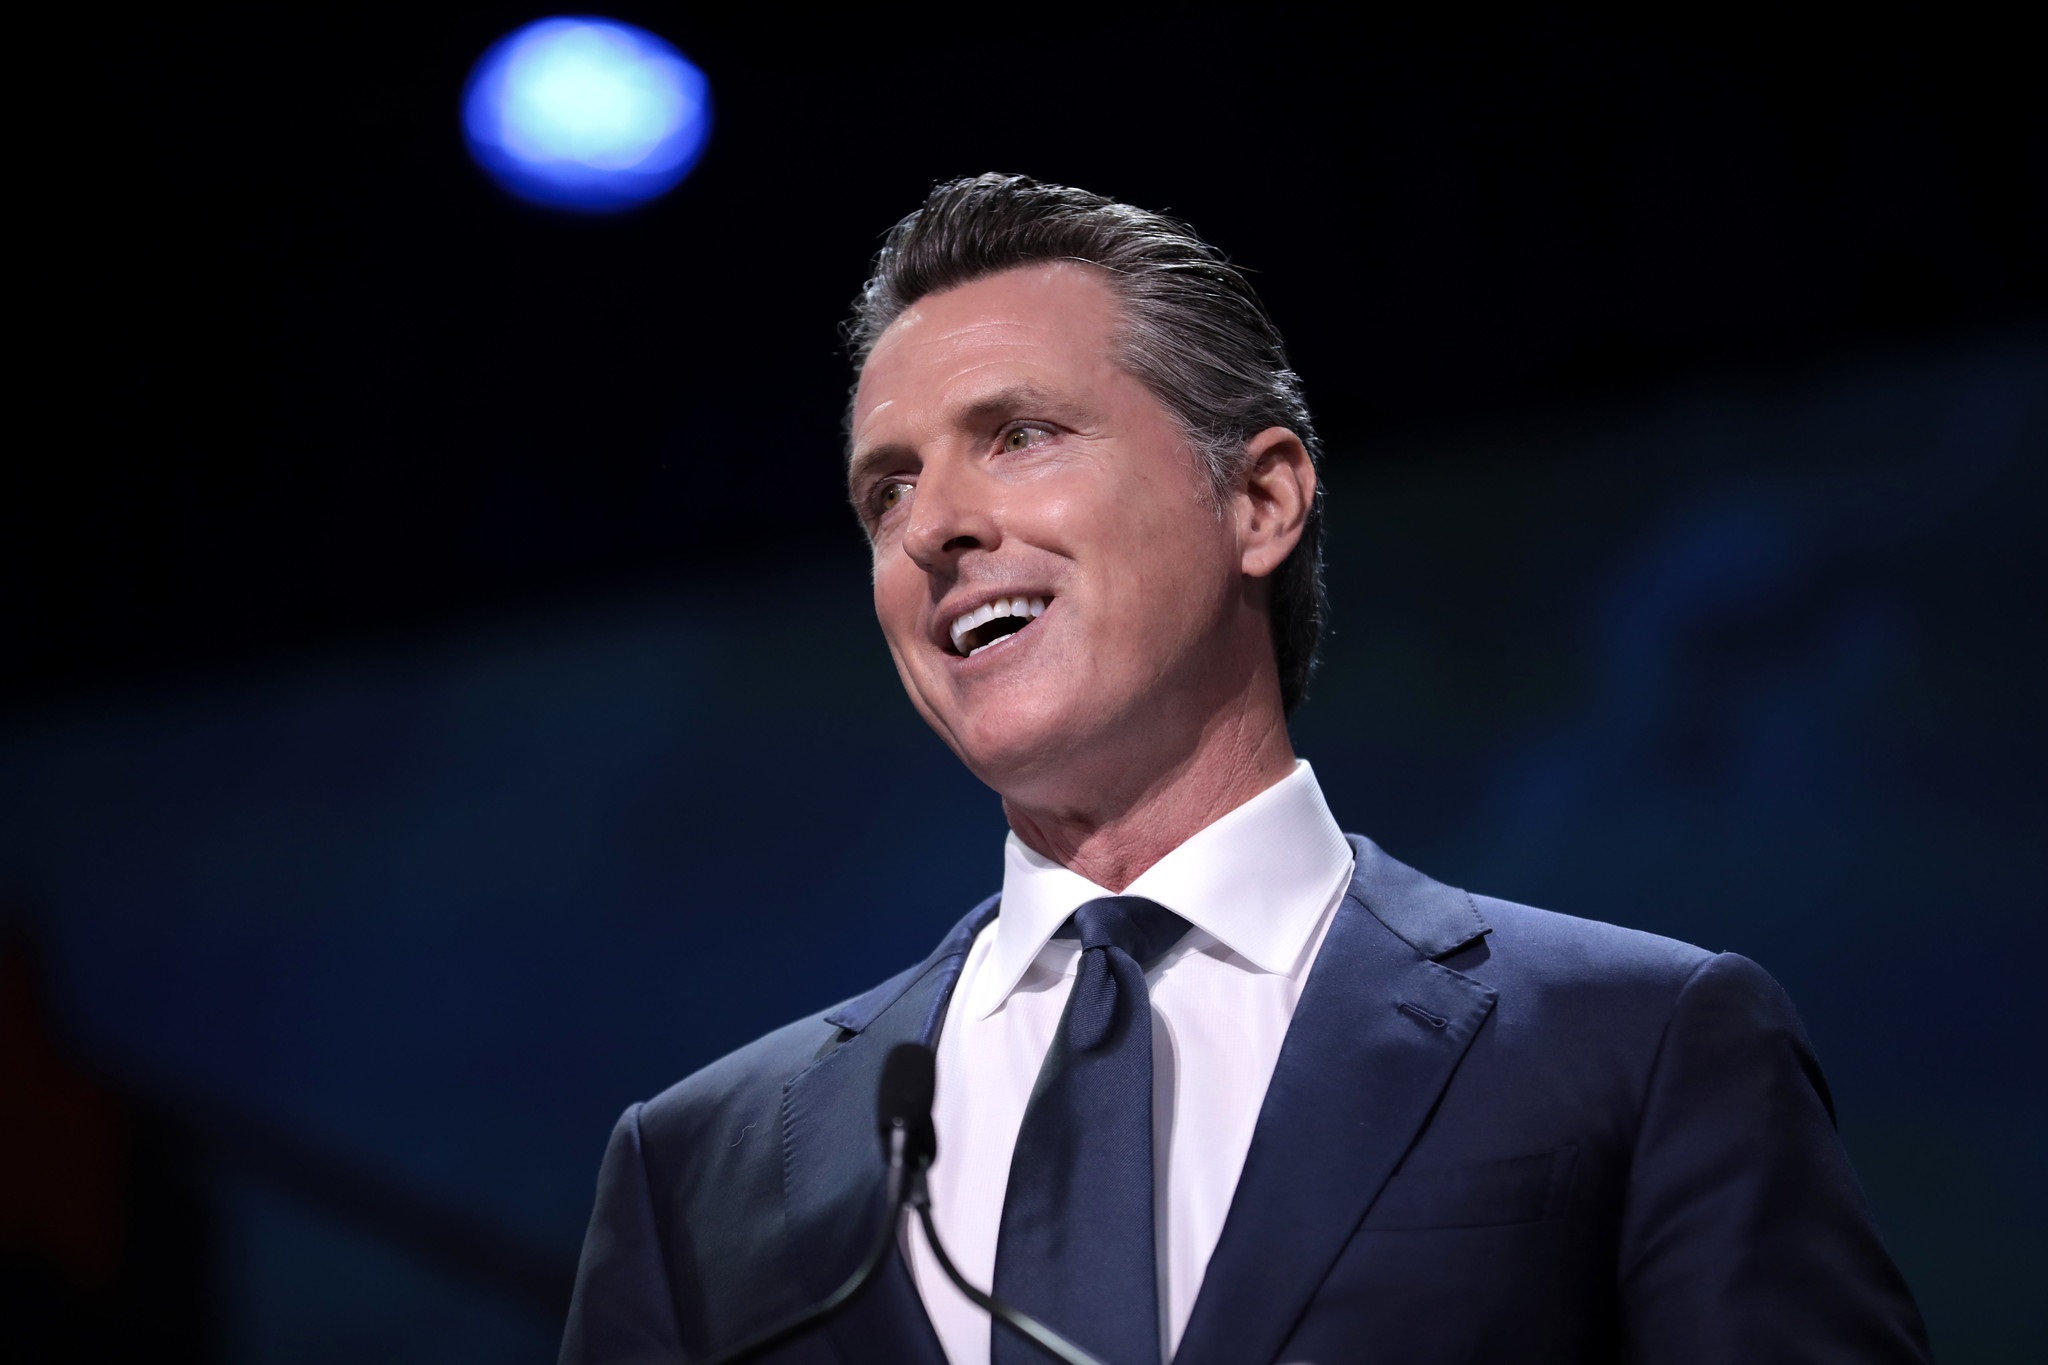 California Gov. Gavin Newsom announced guidelines allowing low-risk retail and industrial facilities to reopen starting Friday. (Gage Skidmore/Flickr)